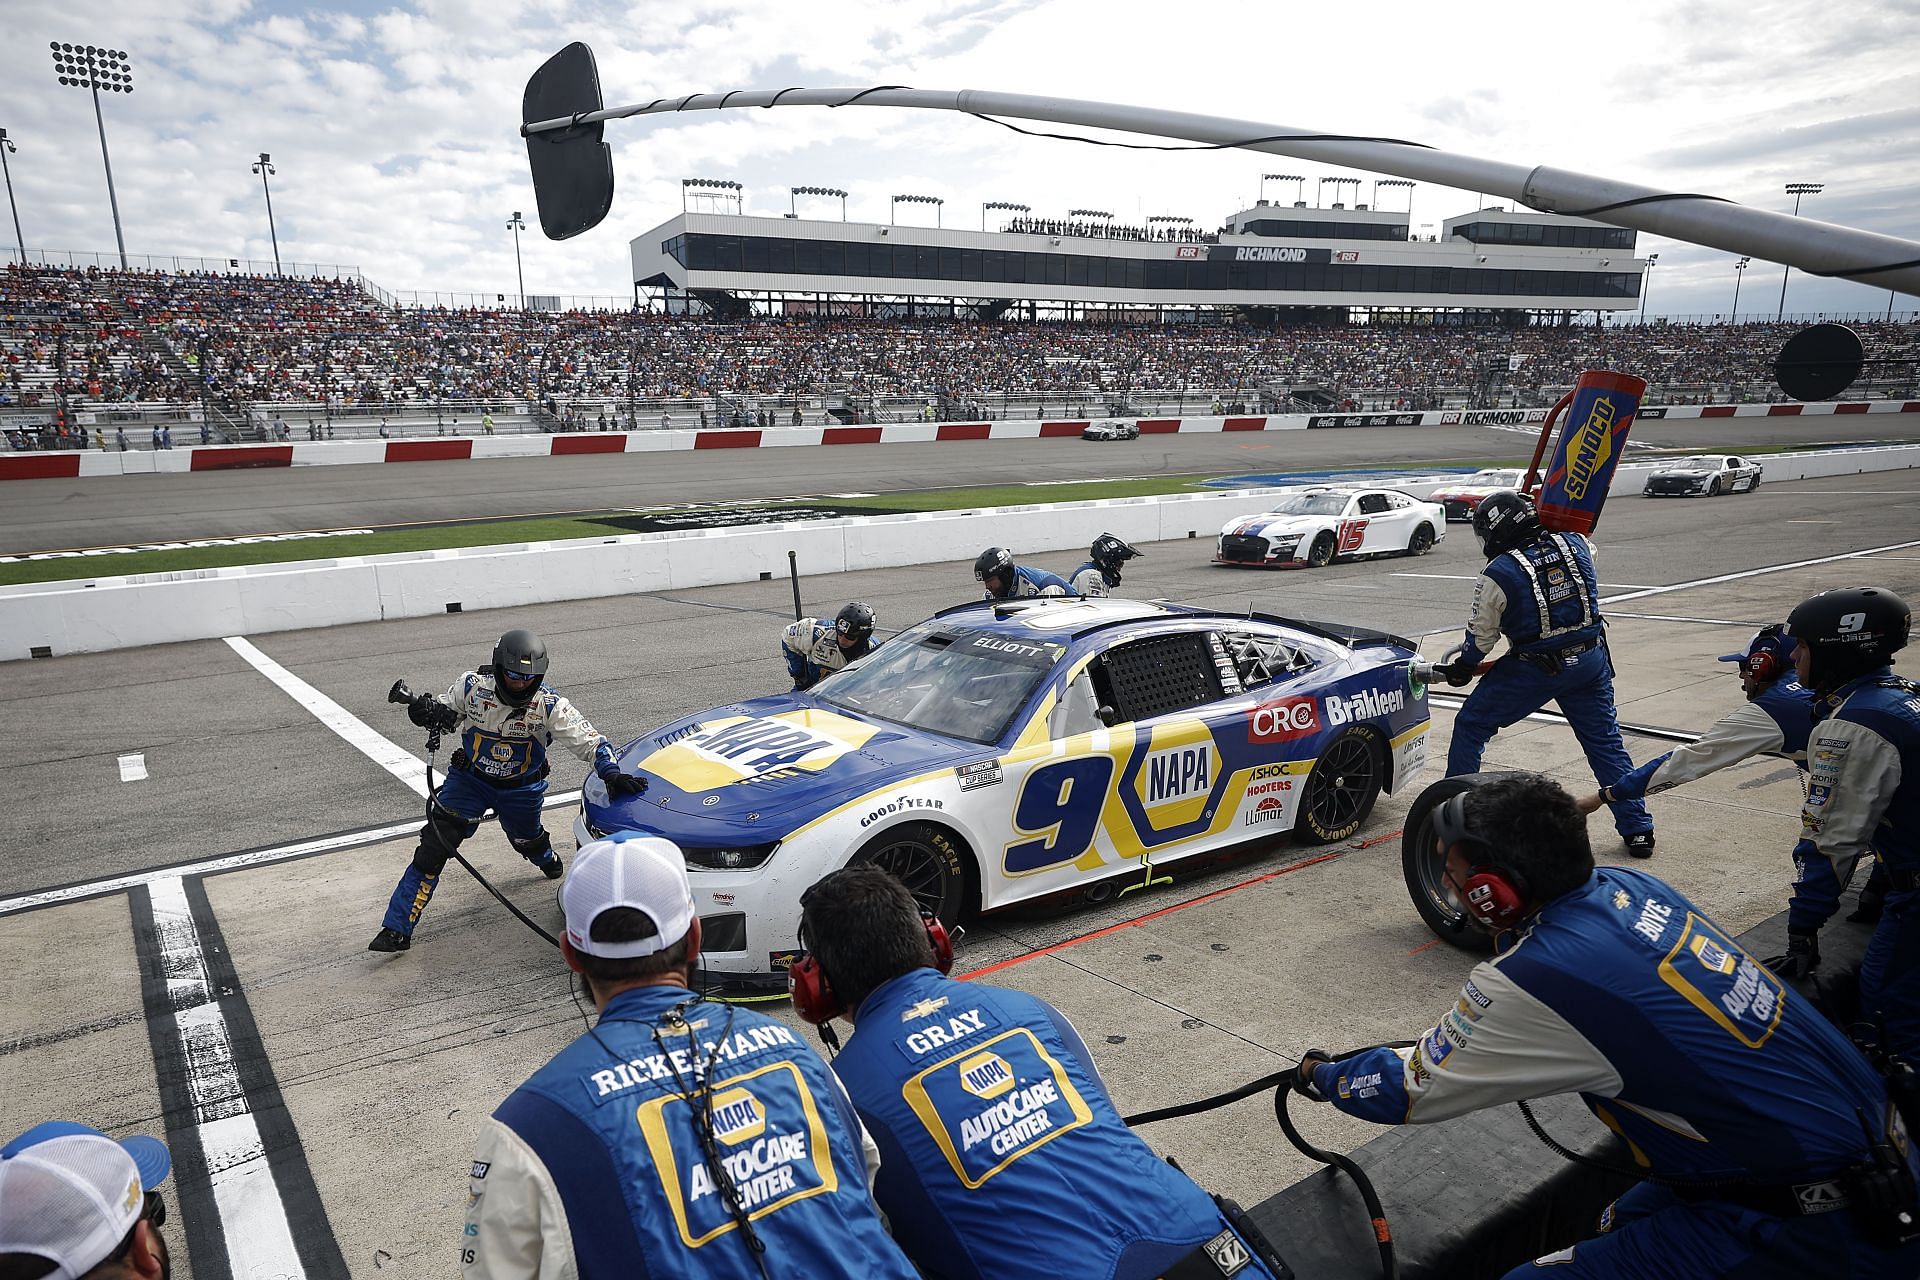 Chase Elliott pits during the 2022 NASCAR Cup Series Federated Auto Parts 400 at Richmond Raceway on August 14, 2022 in Richmond, Virginia. (Photo by Chris Graythen/Getty Images)